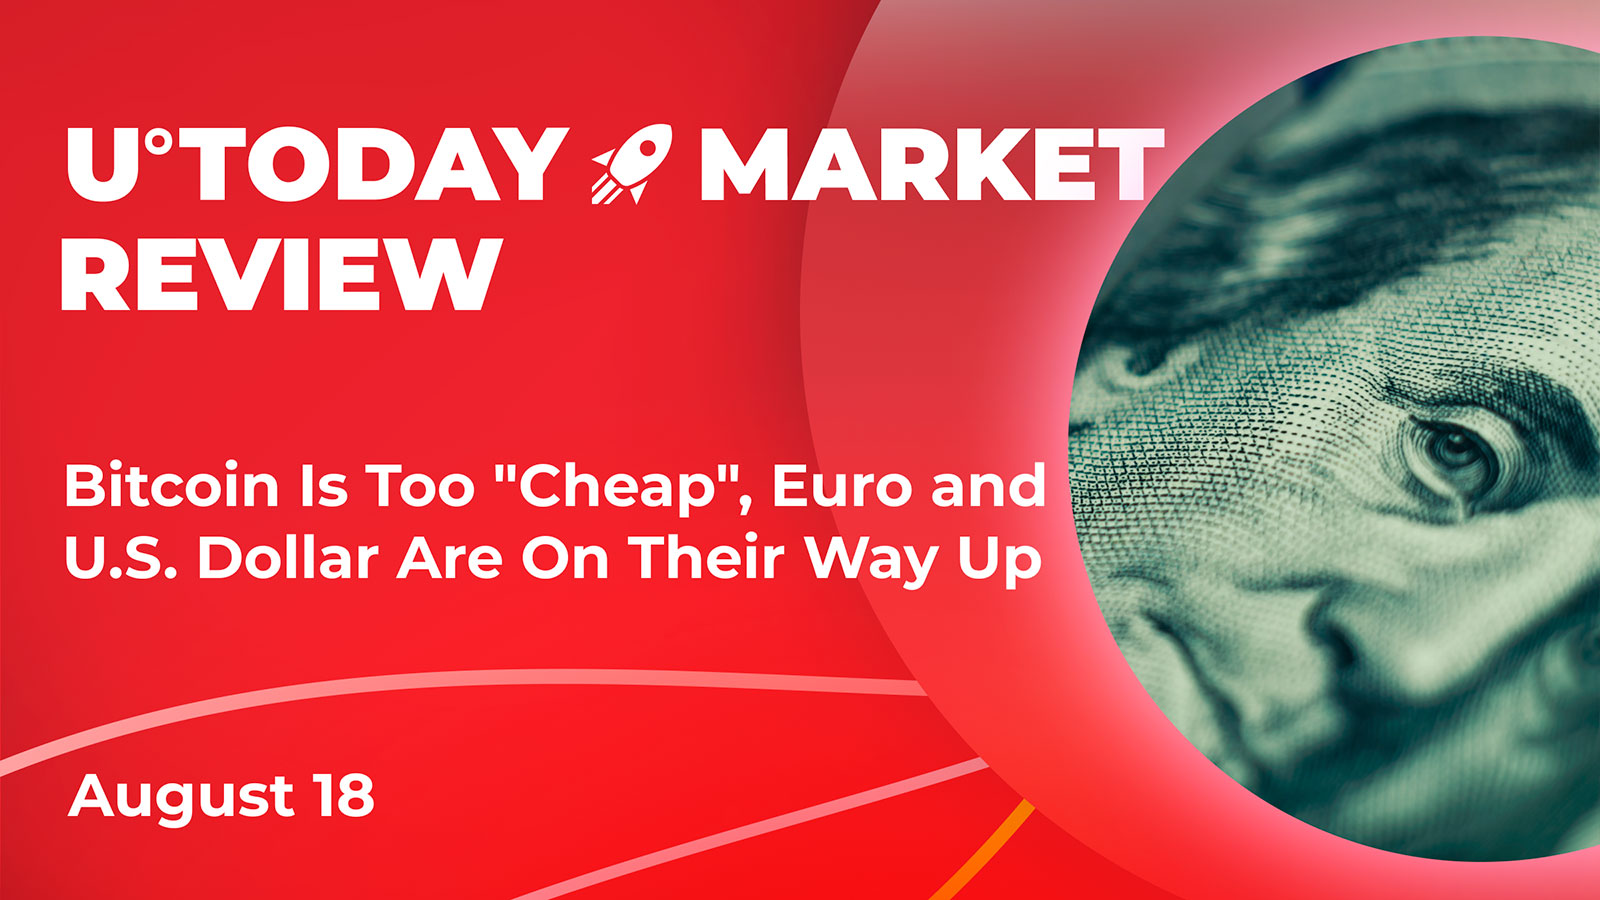 Bitcoin Is Too "Cheap", Euro and U.S. Dollar Are On Their Way Up: Crypto market Review, August 18